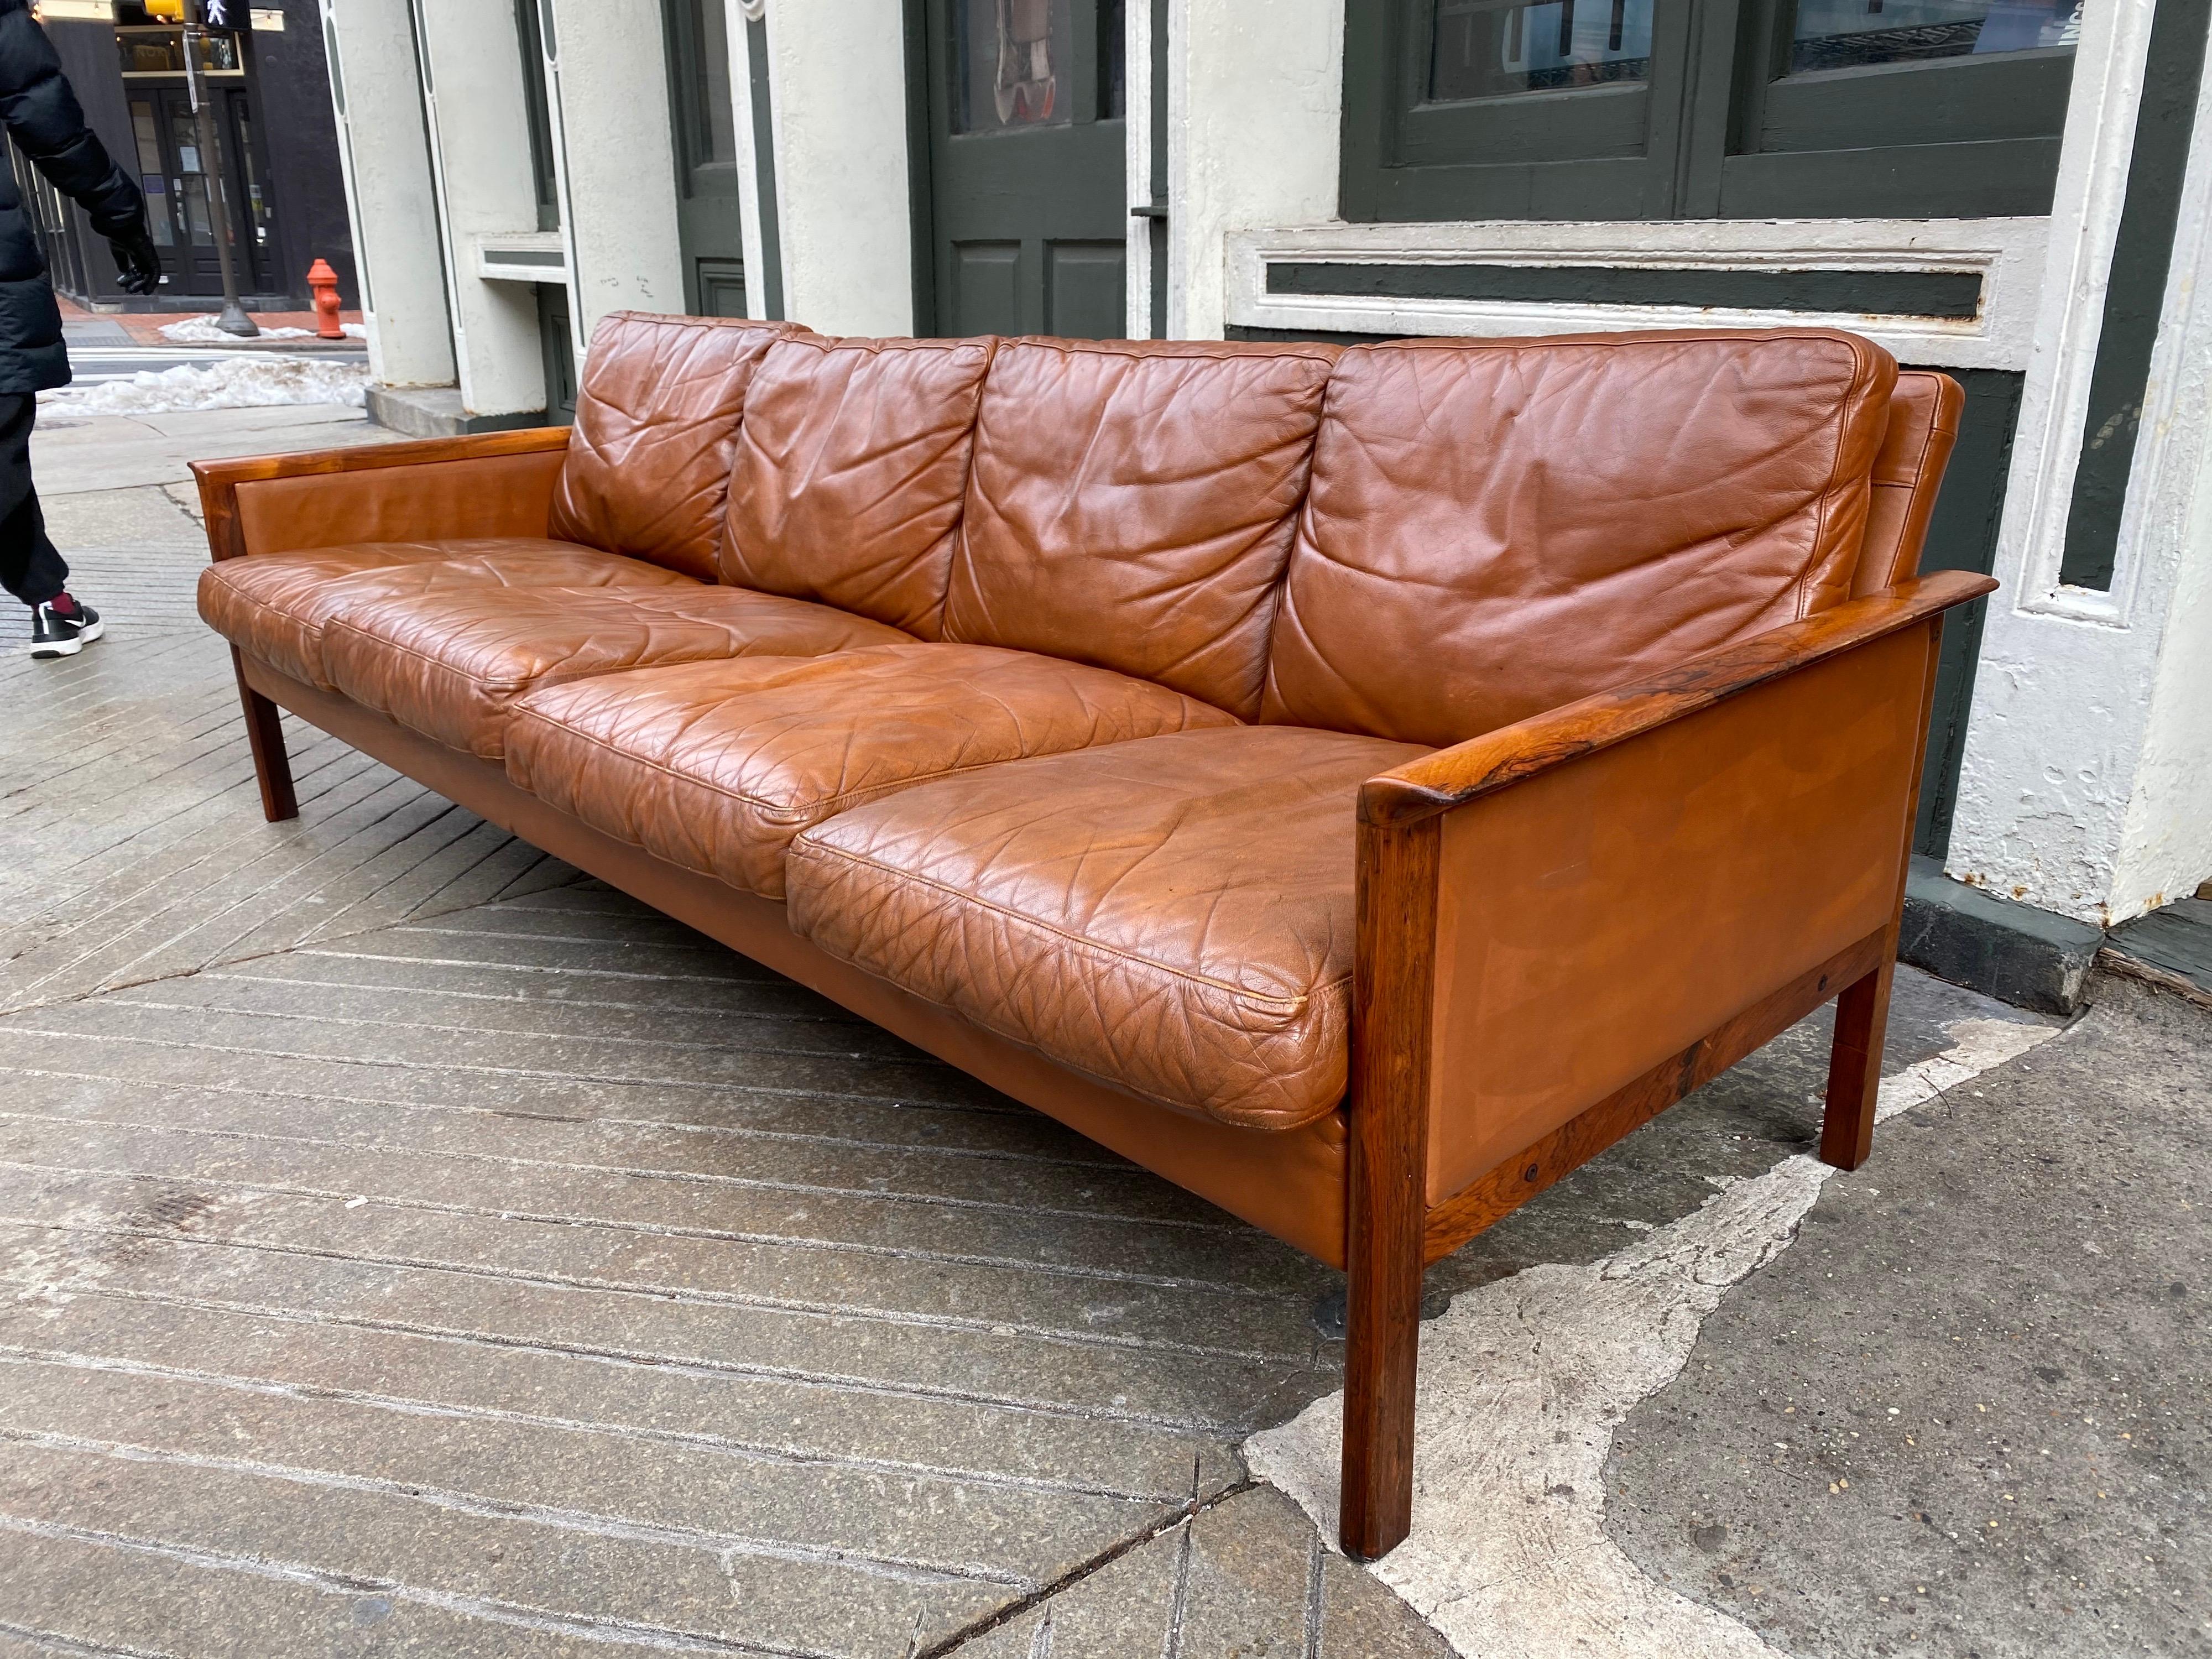 Hans Olsen and Knut Saeter for Vatne Møbler, Norway. Early 1960s rosewood and leather sofa. Leather is beautifully aged, shows signs of use and wear but amazing patina! Leather is super supple and soft! Rosewood shows a little fading, but very even.